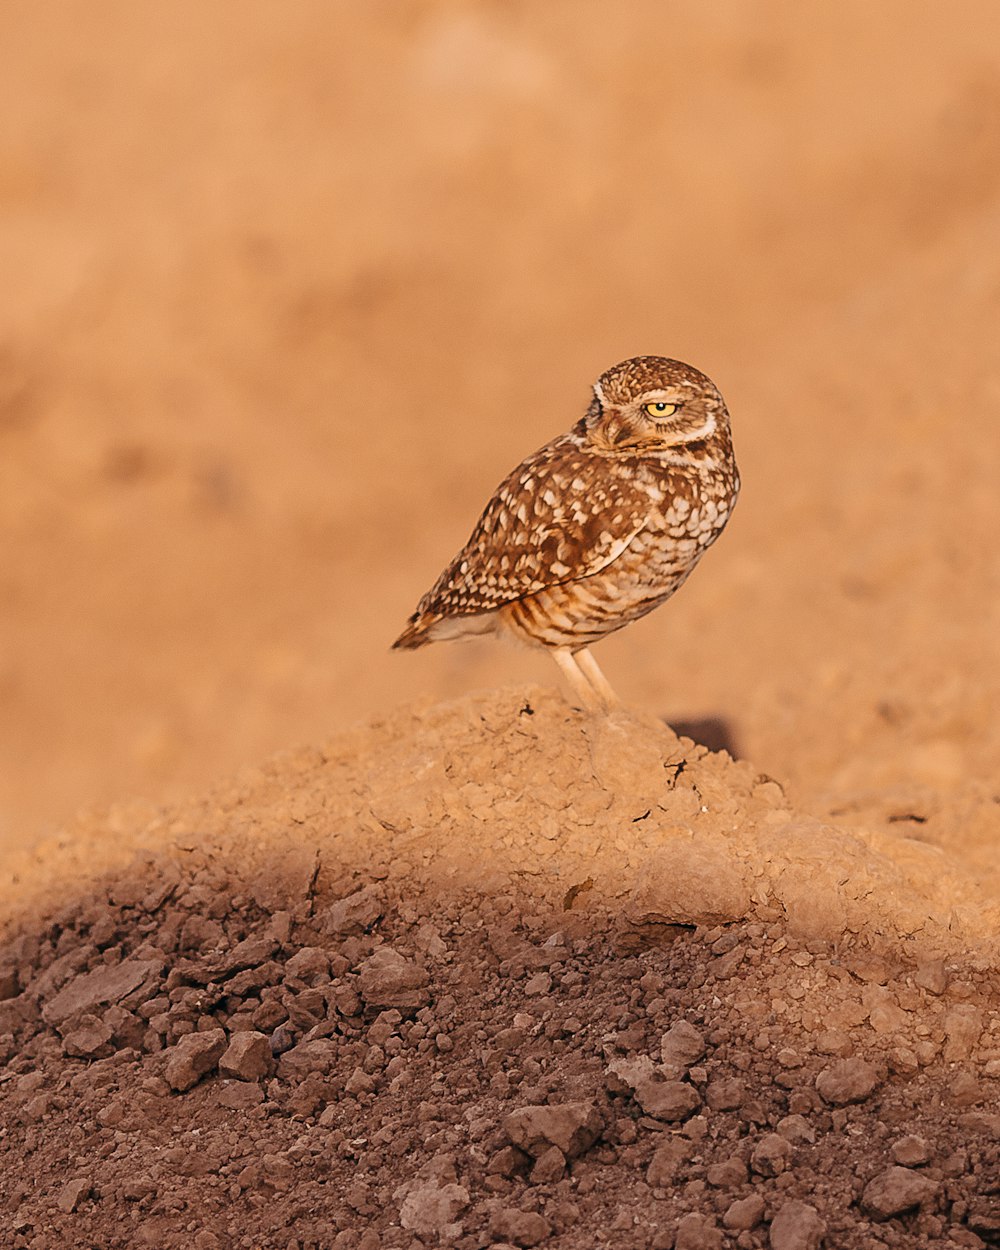 brown and white owl on brown rock during daytime